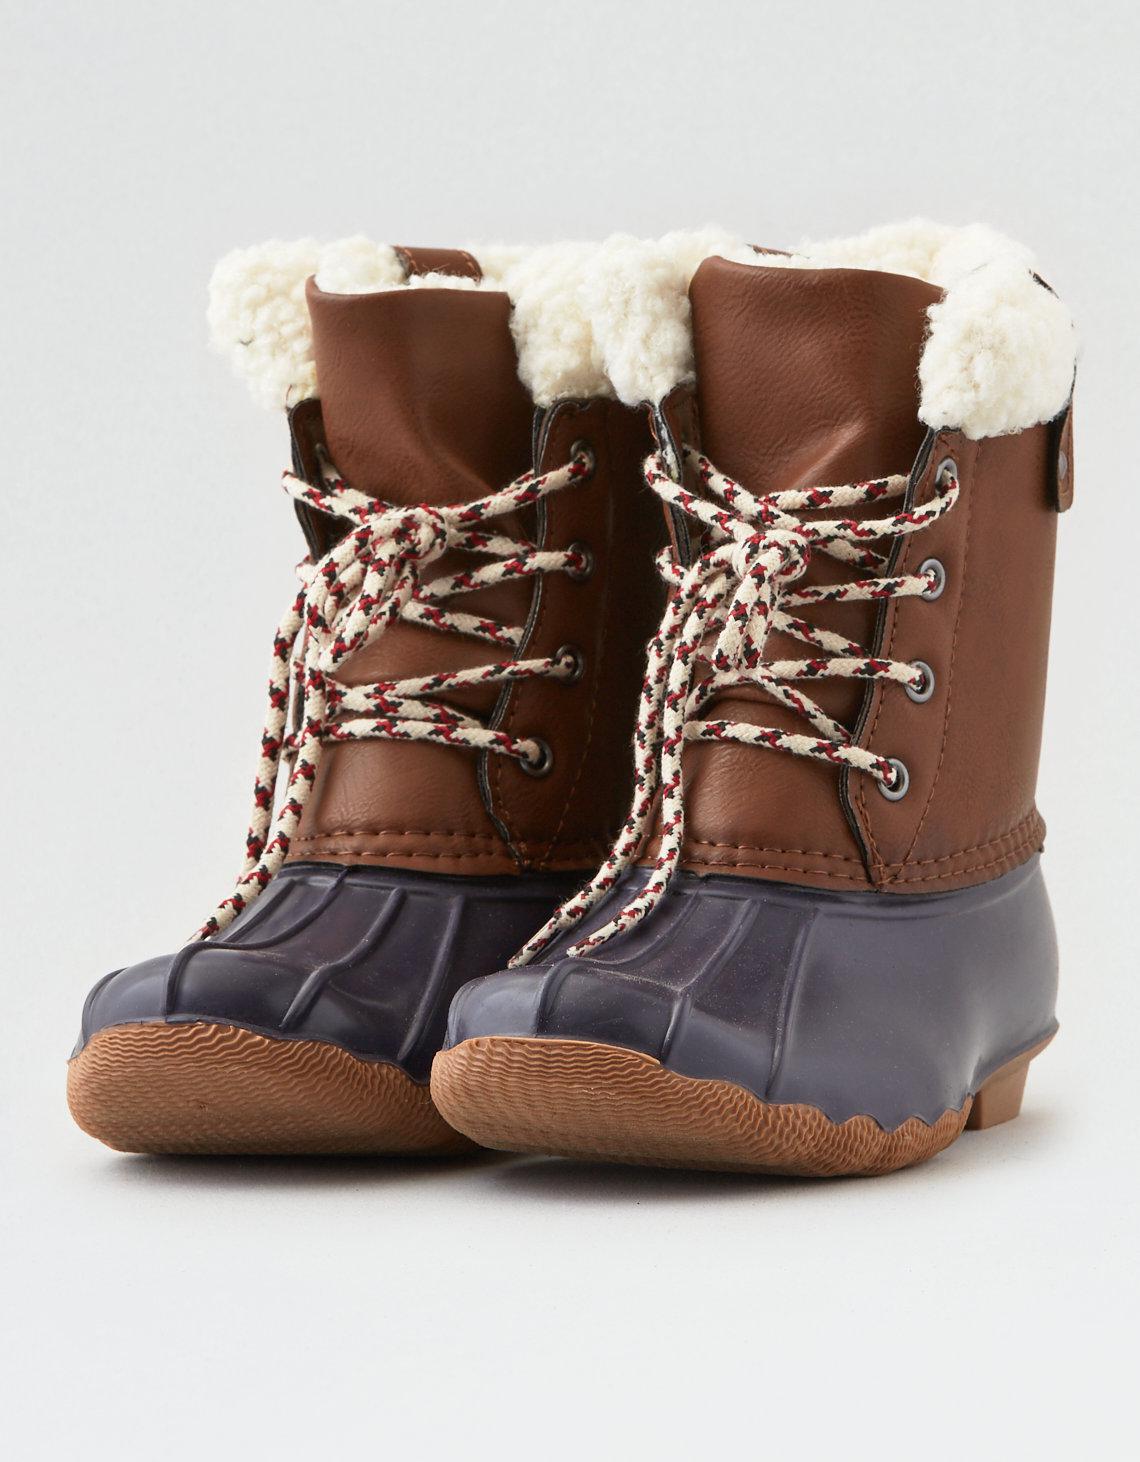 american eagle duck boots